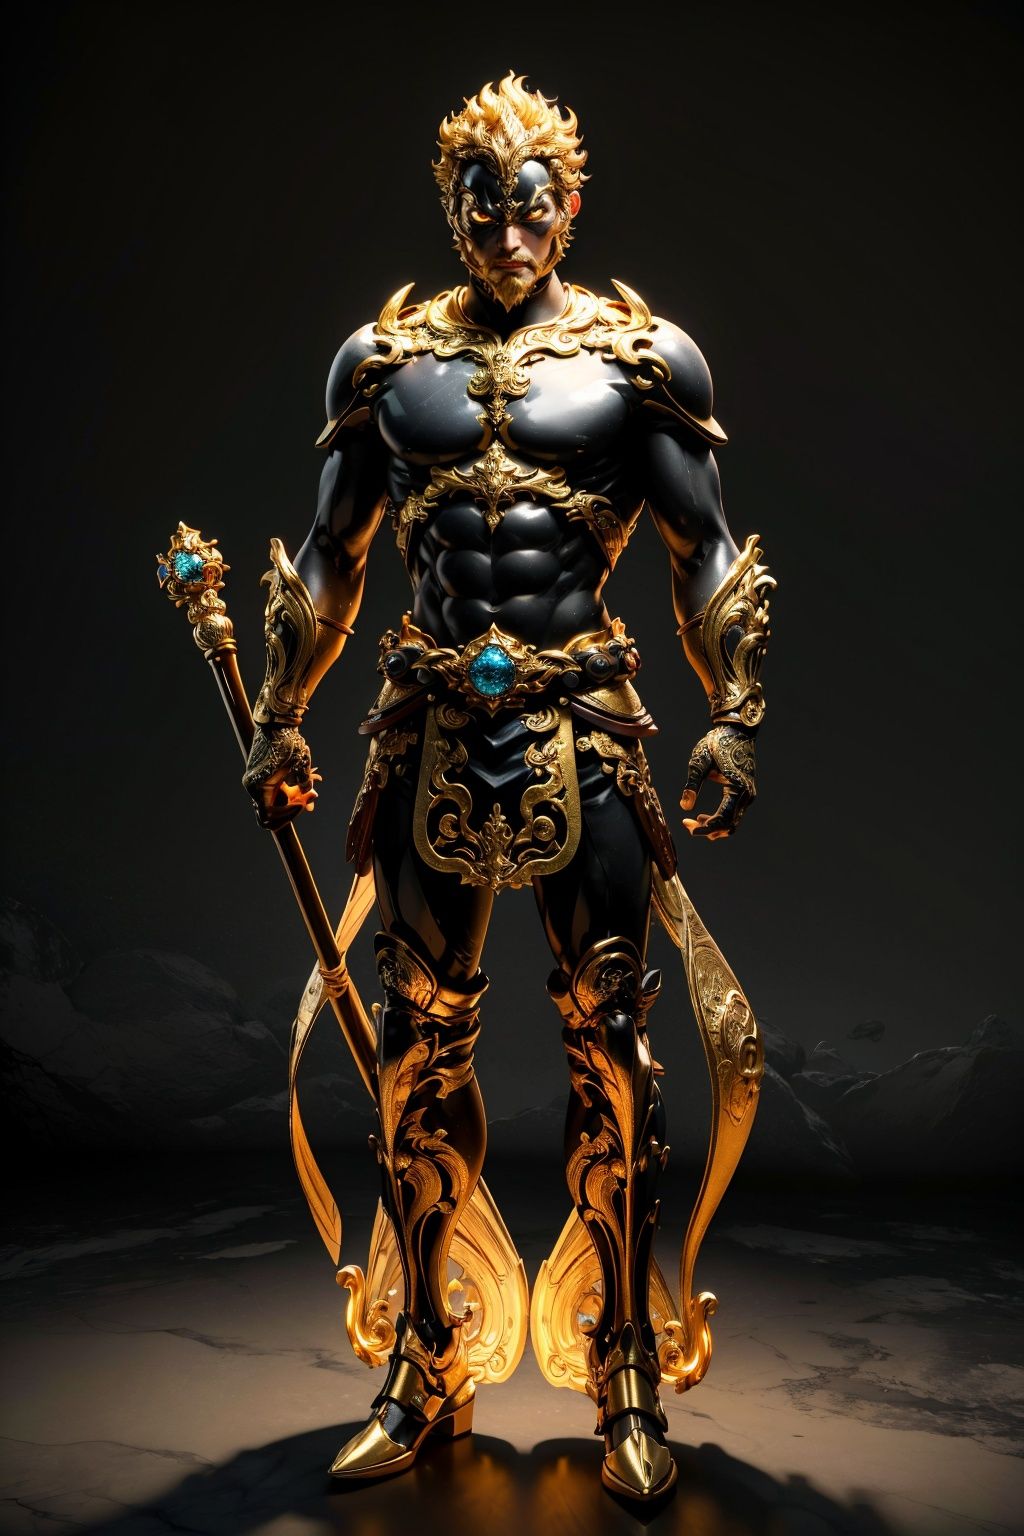 Wild angle view,  full body shot,  The young man is adorned with a golden ring on his head and brandish a long golden stick,  dressed as the legendary character Sun Wukong from the classic Chinesenovel Journey to the West,  full body shot,  with a delicate face,  watery eyes,  in the style of fantastical otherworldly visions,  Neo - futurist hybrid creatures by Tony diterlizzi,  genndy tartakovsky,  emil melmoth,  mind - bending patterns,  strong contrast,  chiaroscuro,  paul pelletier,  natural volumetric,  depth of feld,  Award - winning core photorealistic,  dreamy,  high defnition,  detailed intricate,  Unreal Engine,  8k,  super detail,  blender,  C4D, <lora:EMS-50752-EMS:0.400000>, , <lora:EMS-52287-EMS:0.500000>, , <lora:EMS-13709-EMS:0.500000>, , <lora:EMS-64325-EMS:0.900000>